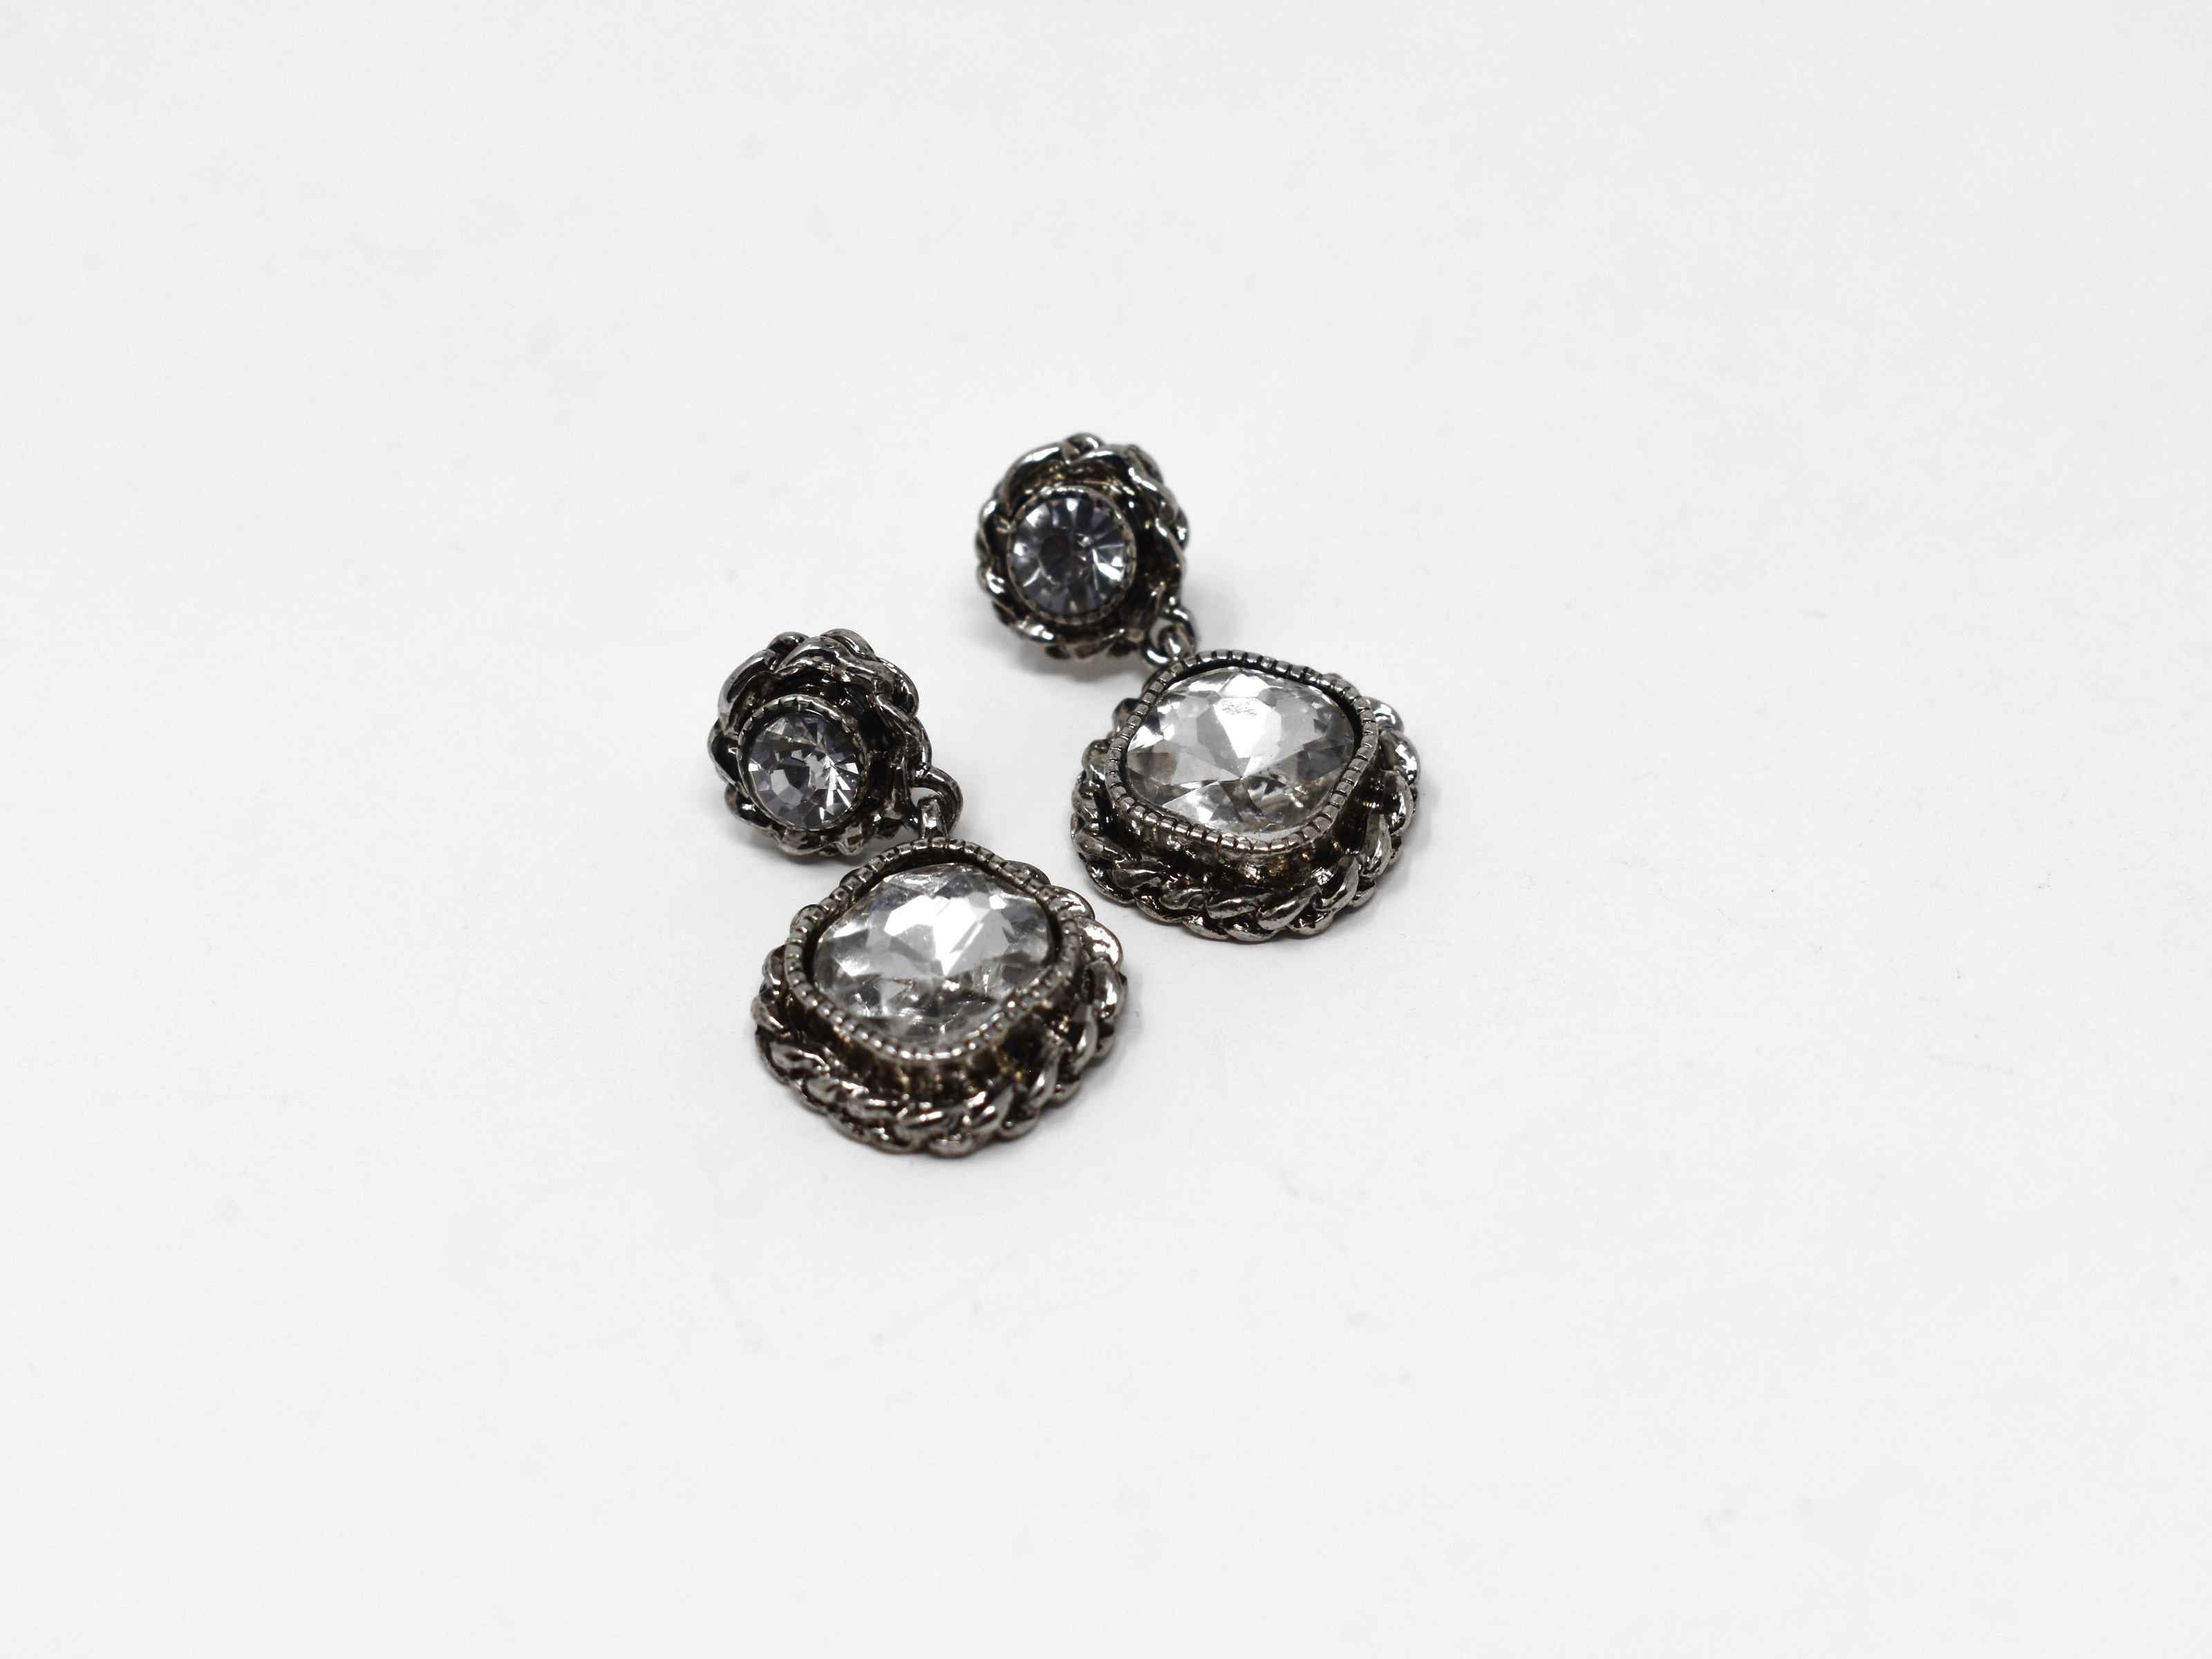 Our chic flax earrings are a sweet statement piece. These earrings are a silver chandelier knob earring with a  centered stone. They are 1 inch in length with a push back clasp.